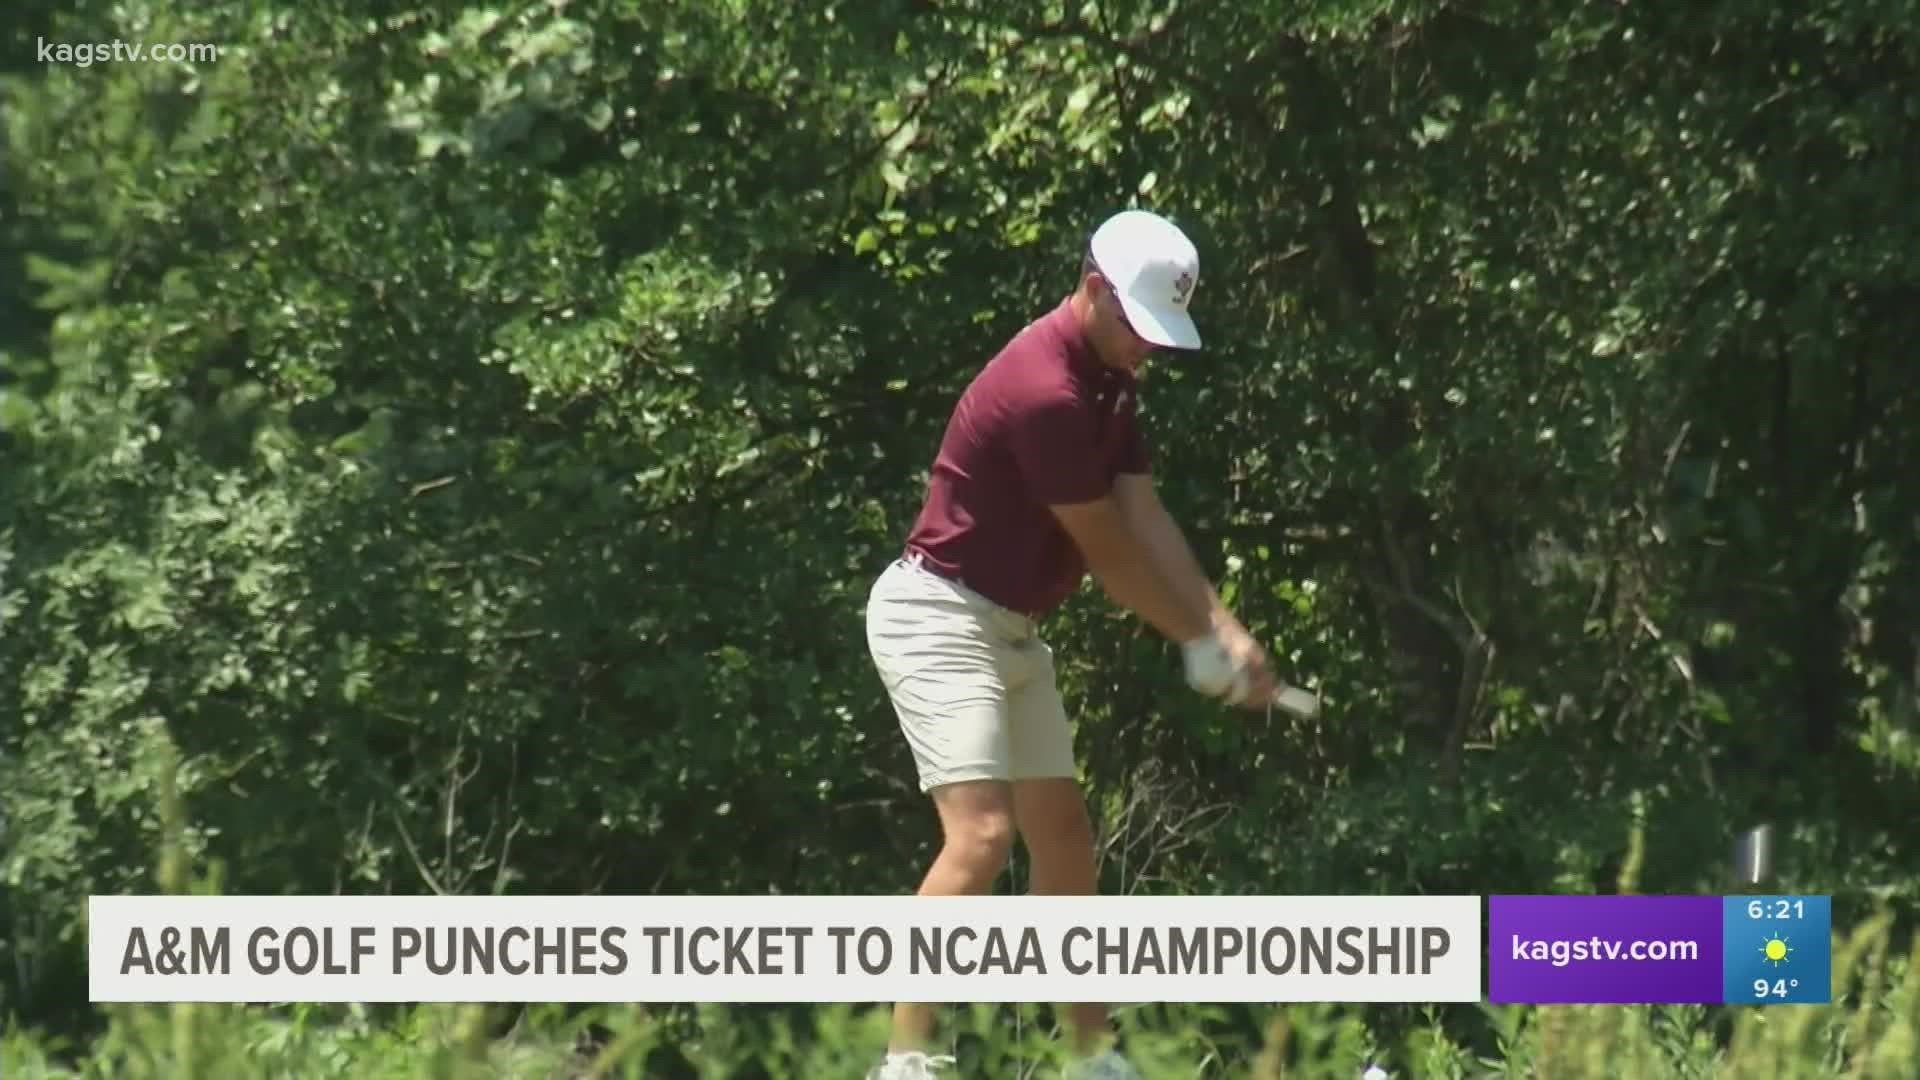 With the third place finish at the Bryan Regional, A&M men's golf is headed to the NCAA Championship in Scottsdale, Arizona.